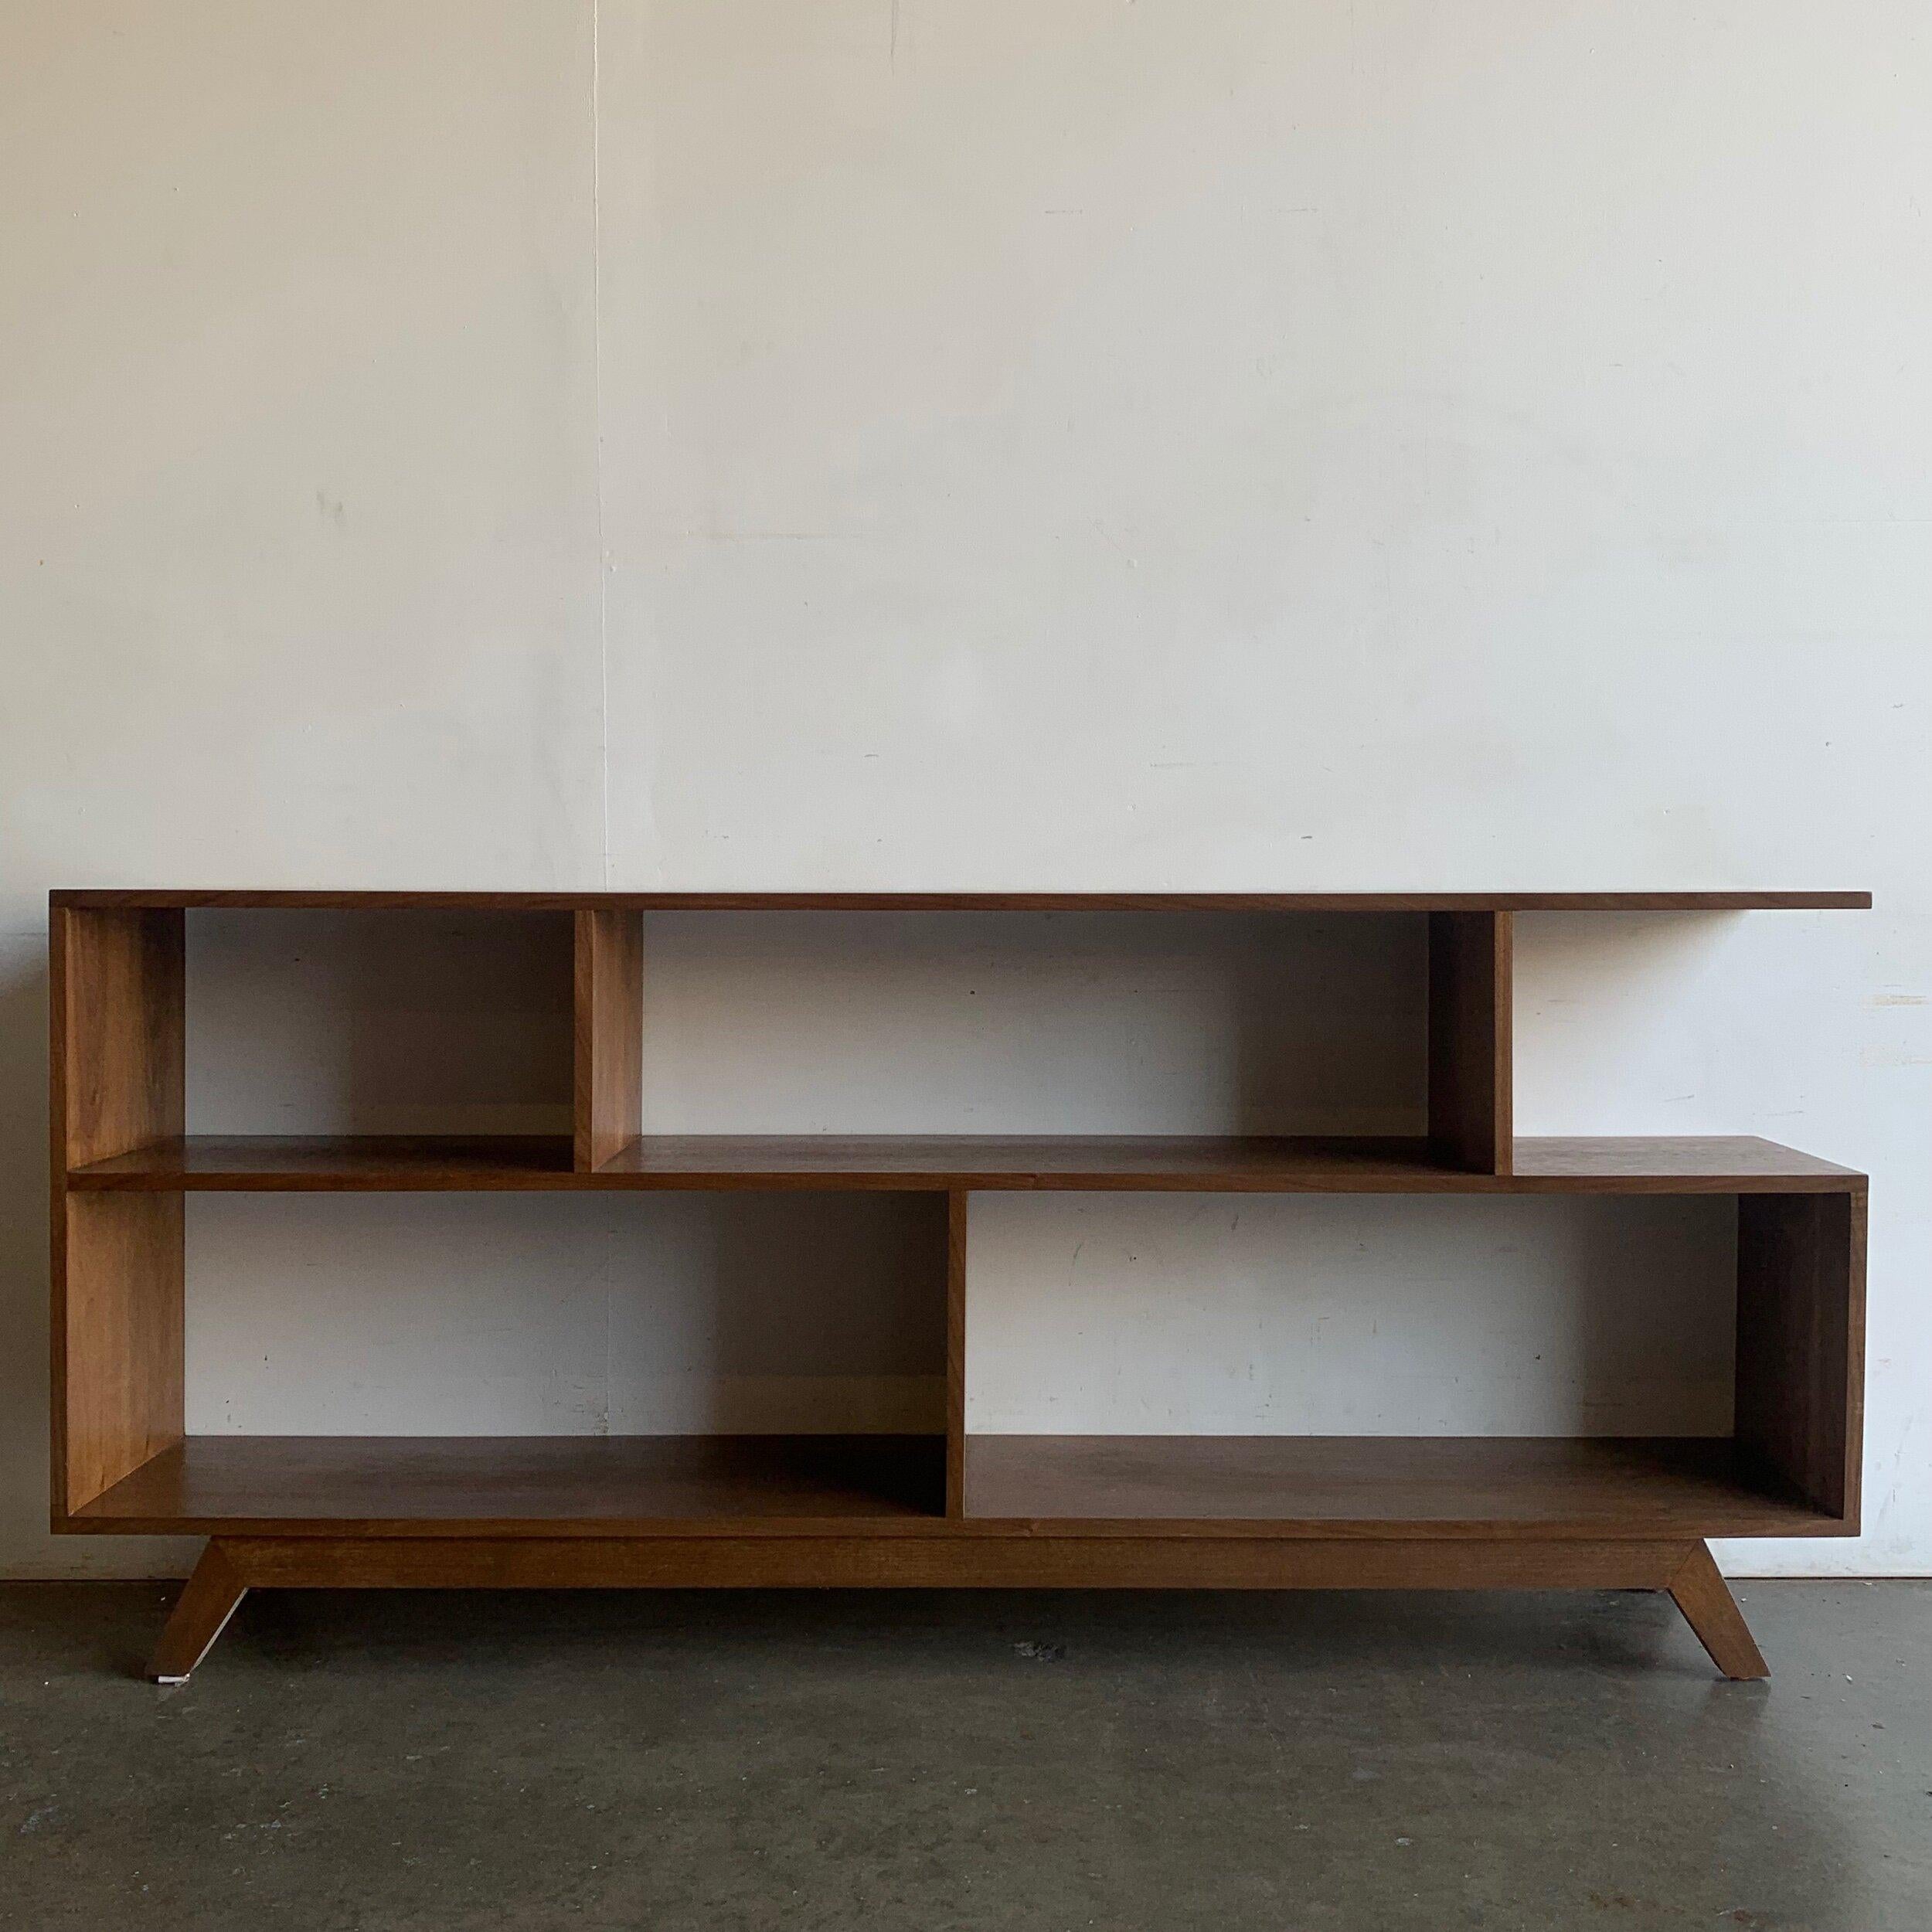 W72 D13 H32

Handcrafted walnut bookcase made in a mix of solid and walnut veneer. Item is structurally sound and sturdy.

This item is not currently available on the showroom floor but can be made available within 6-8 weeks after purchase in your